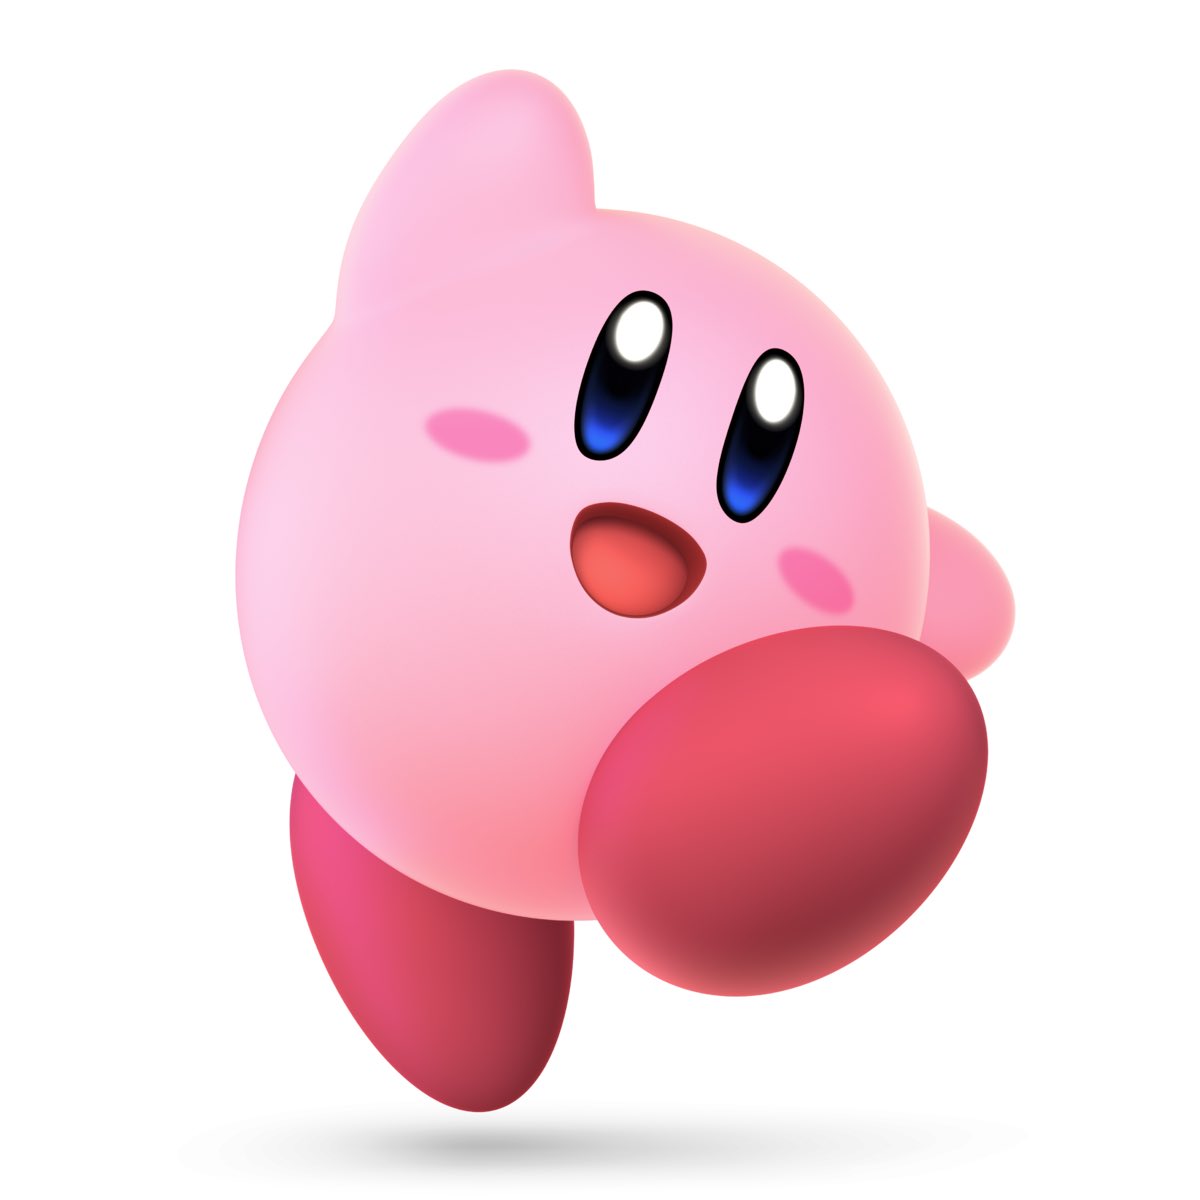 Kirby Mains: Kirby mains are usually either 12 year olds or men and women who constantly say “im baby” and post OwO in all of their text messages. They usually don’t care that much about winning and aren’t really super skilled but they are super nice and will bake you cookies.